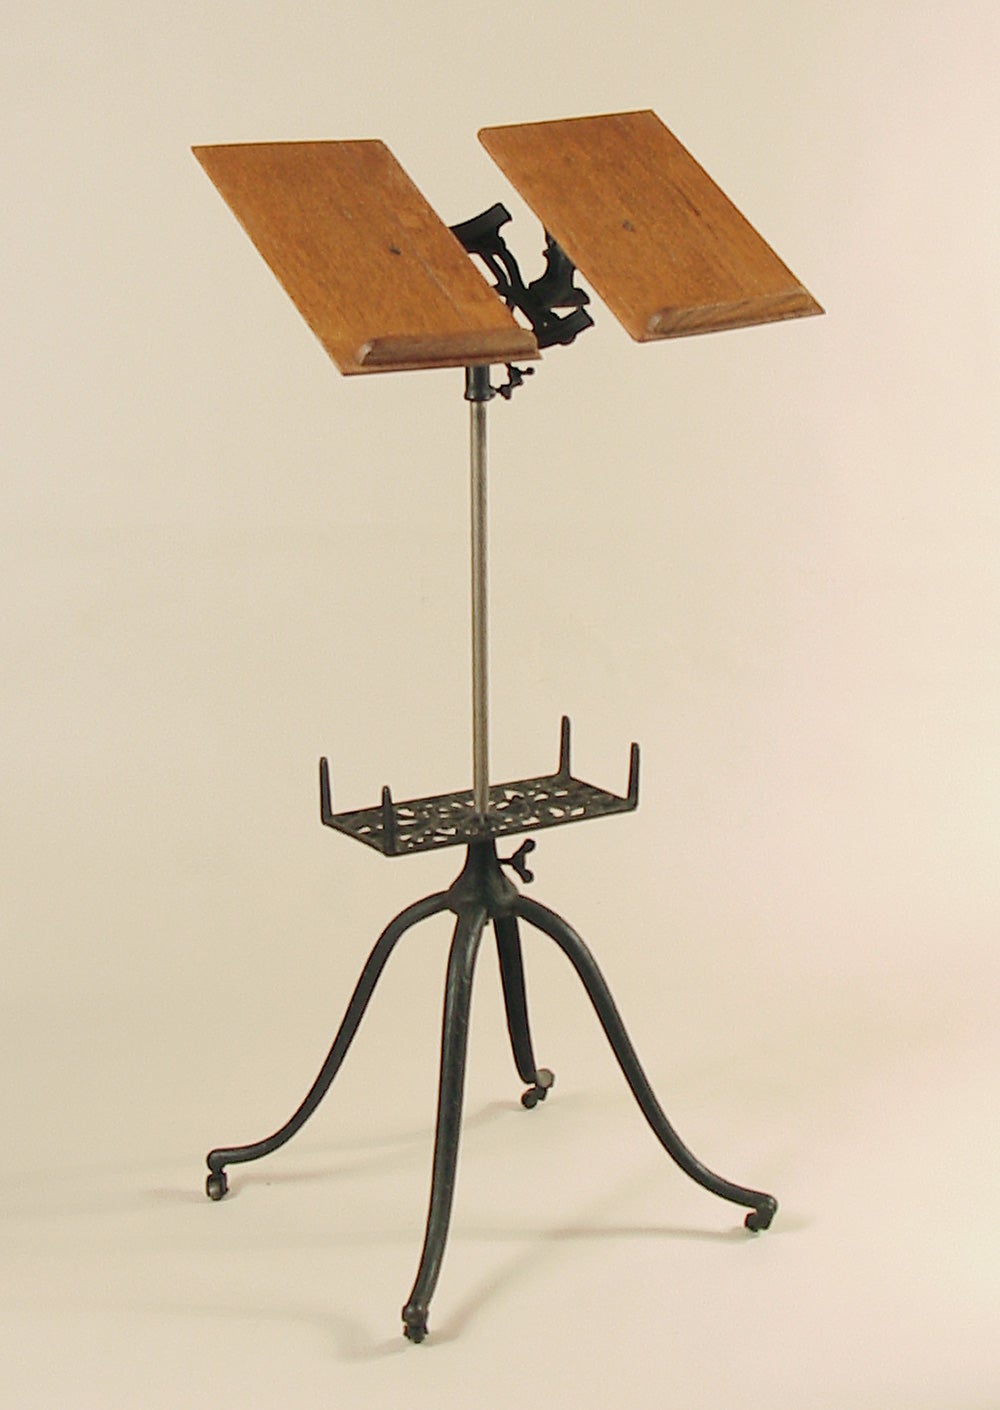 Early 20th Century Dictionary/Music Stand Perfect for a Computer!